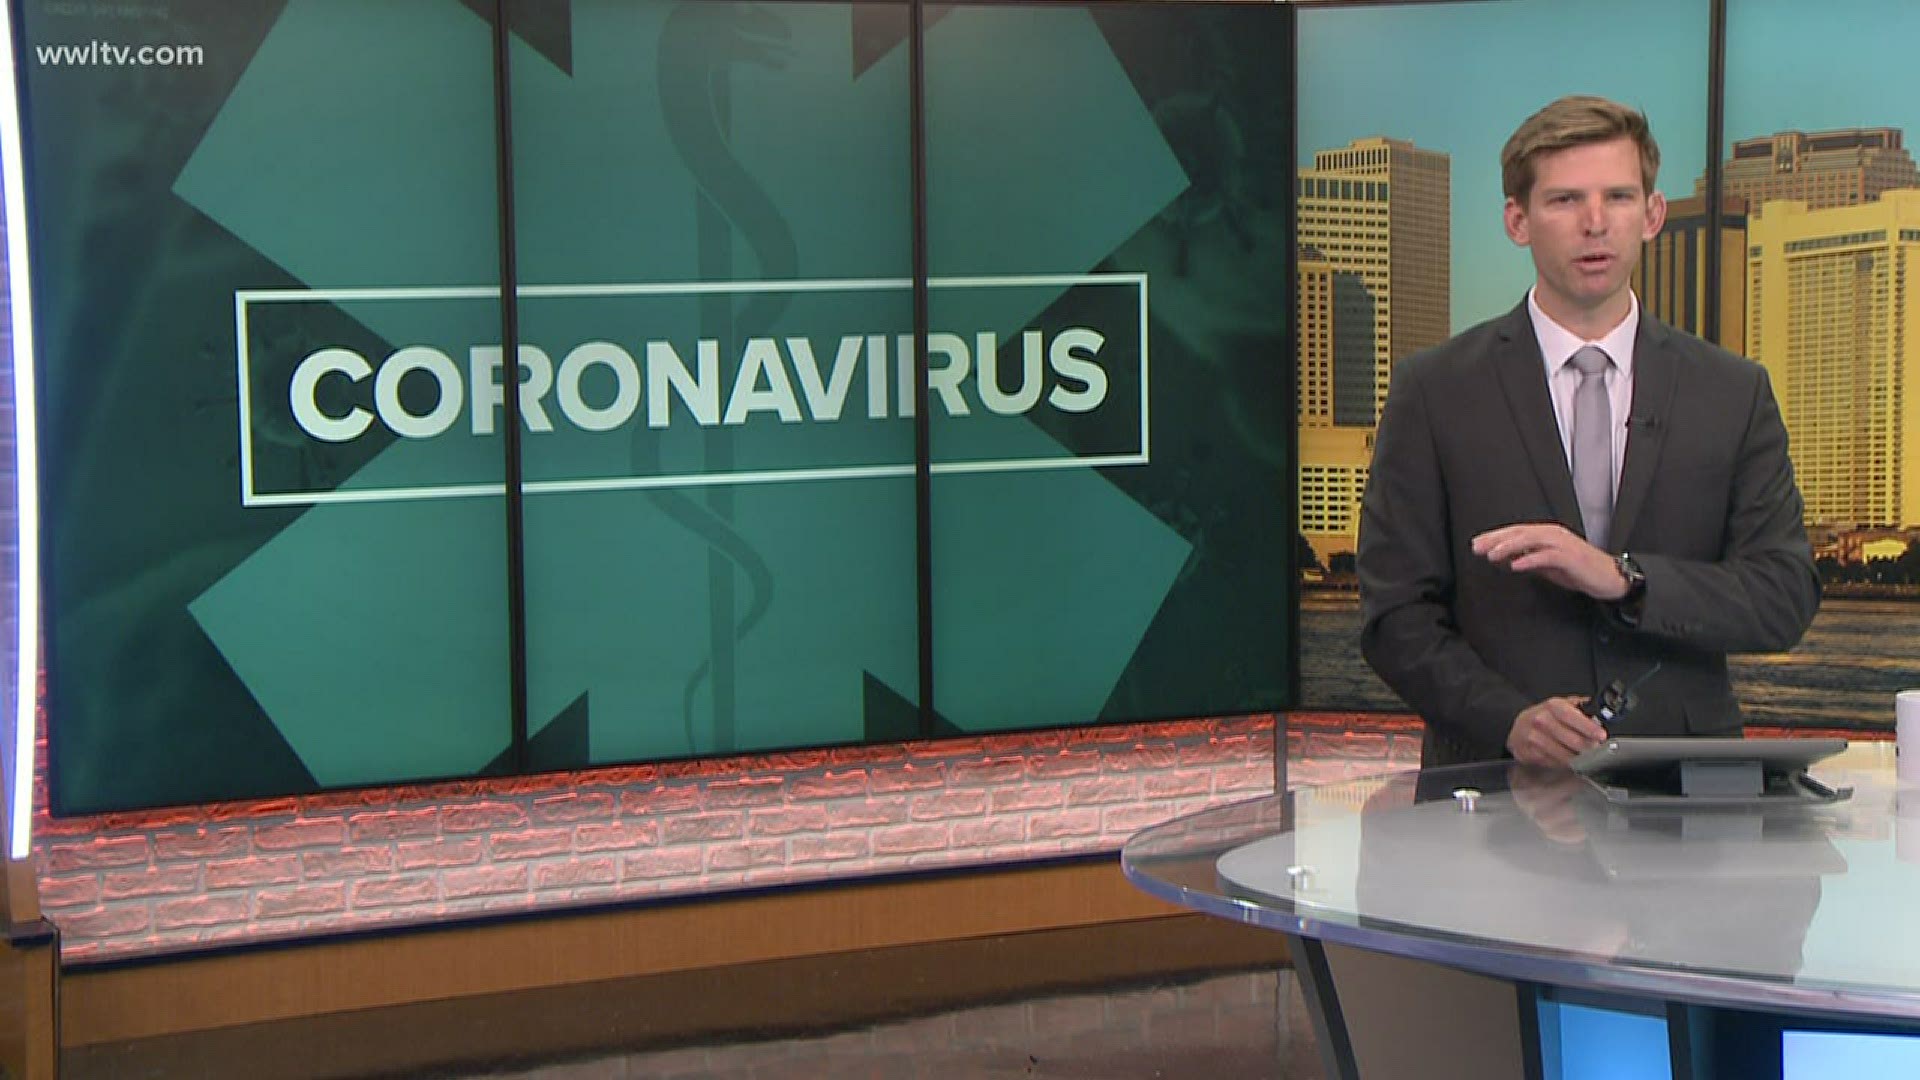 Paul Dudley and Meterologist Payton Malone have Saturday morning updates on the coronavirus outbreak and the chance of severe weather on Easter.